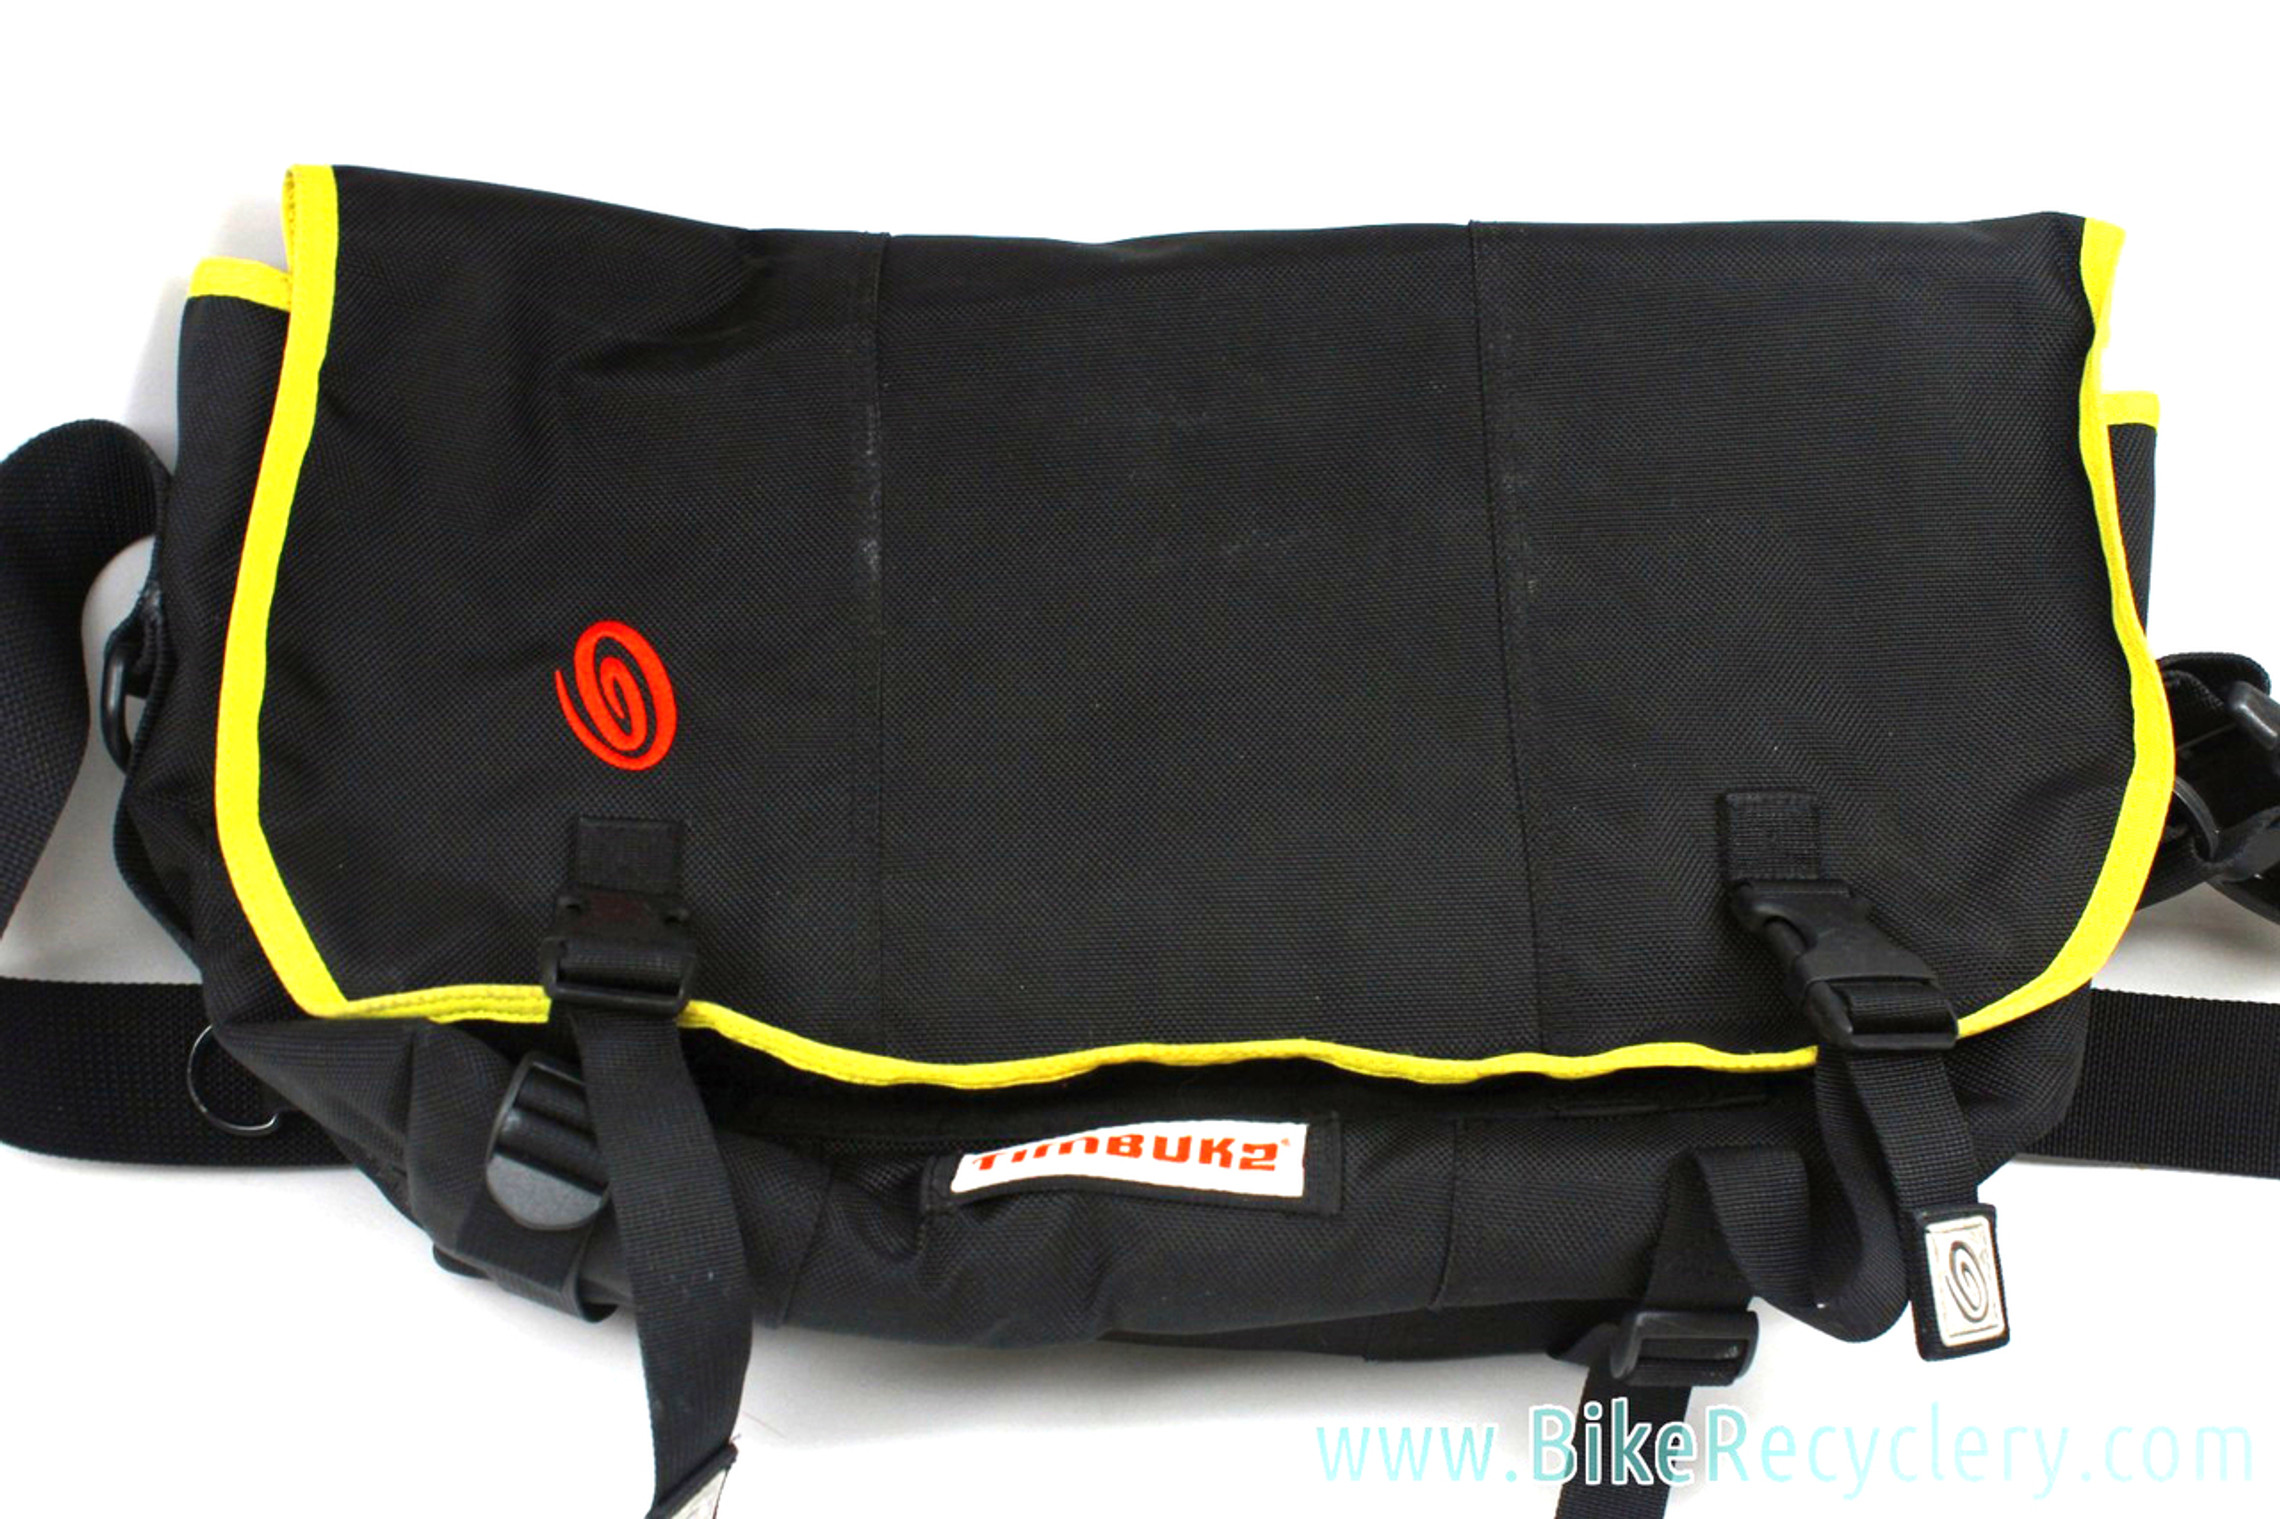 Timbuk2 Commute Messenger Bag - LIKE NEW for Sale in Portland, OR - OfferUp